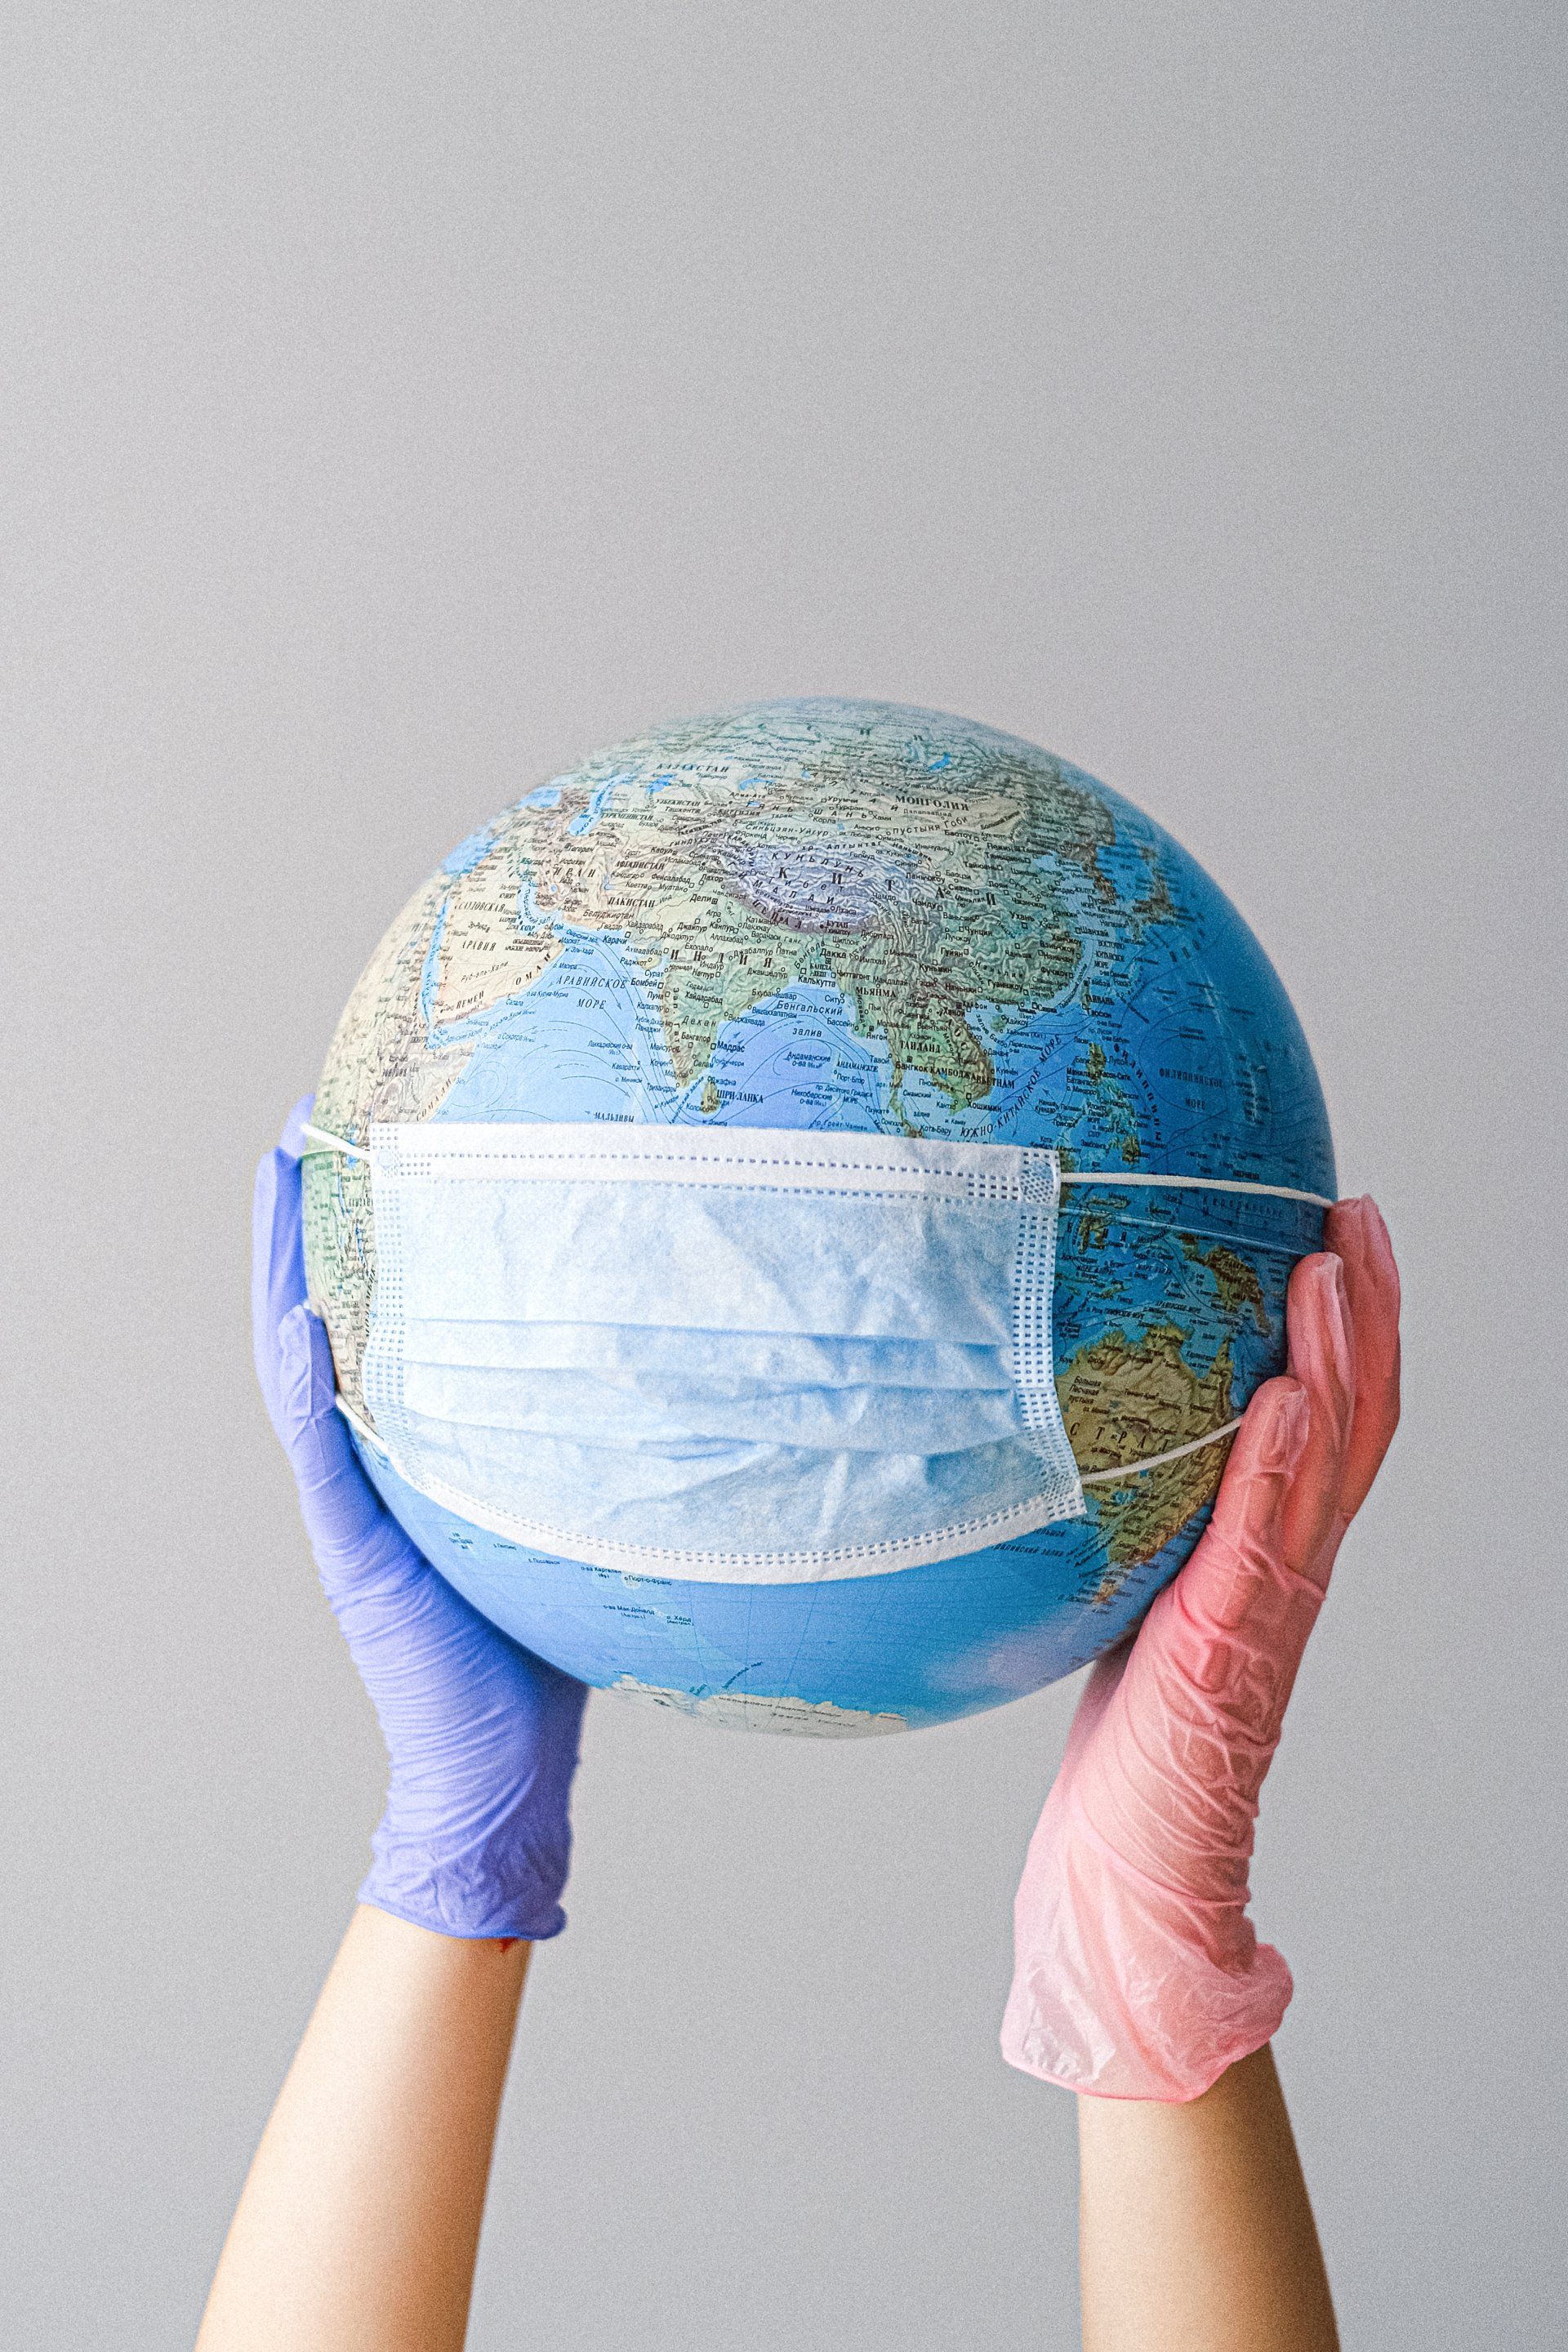 Globe held in someone's hands with a surgical mask